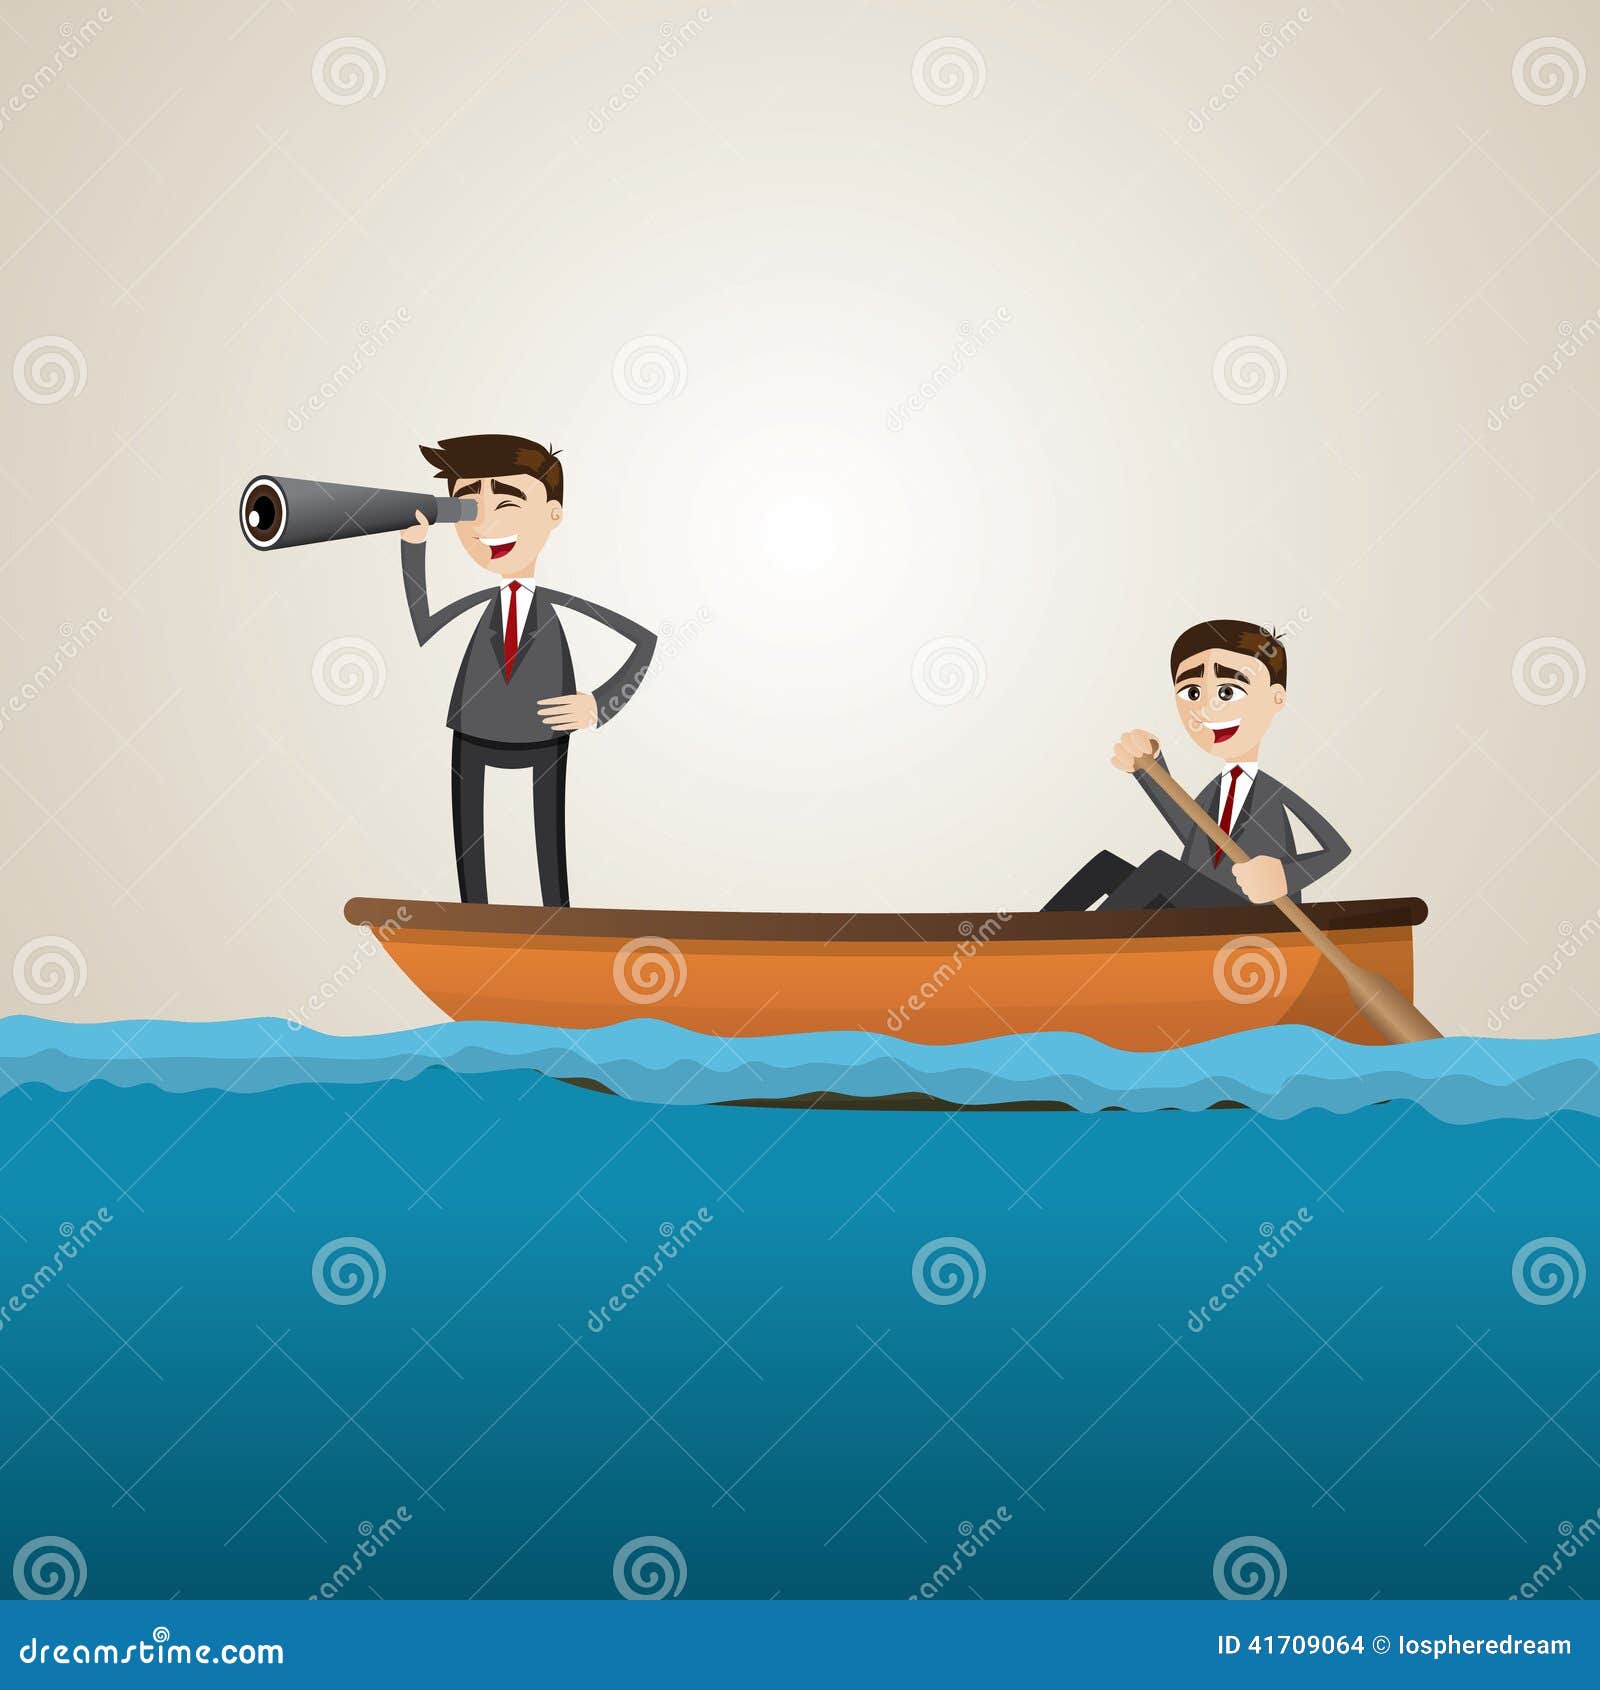 cartoon businessman paddling on sea with teammate scouting